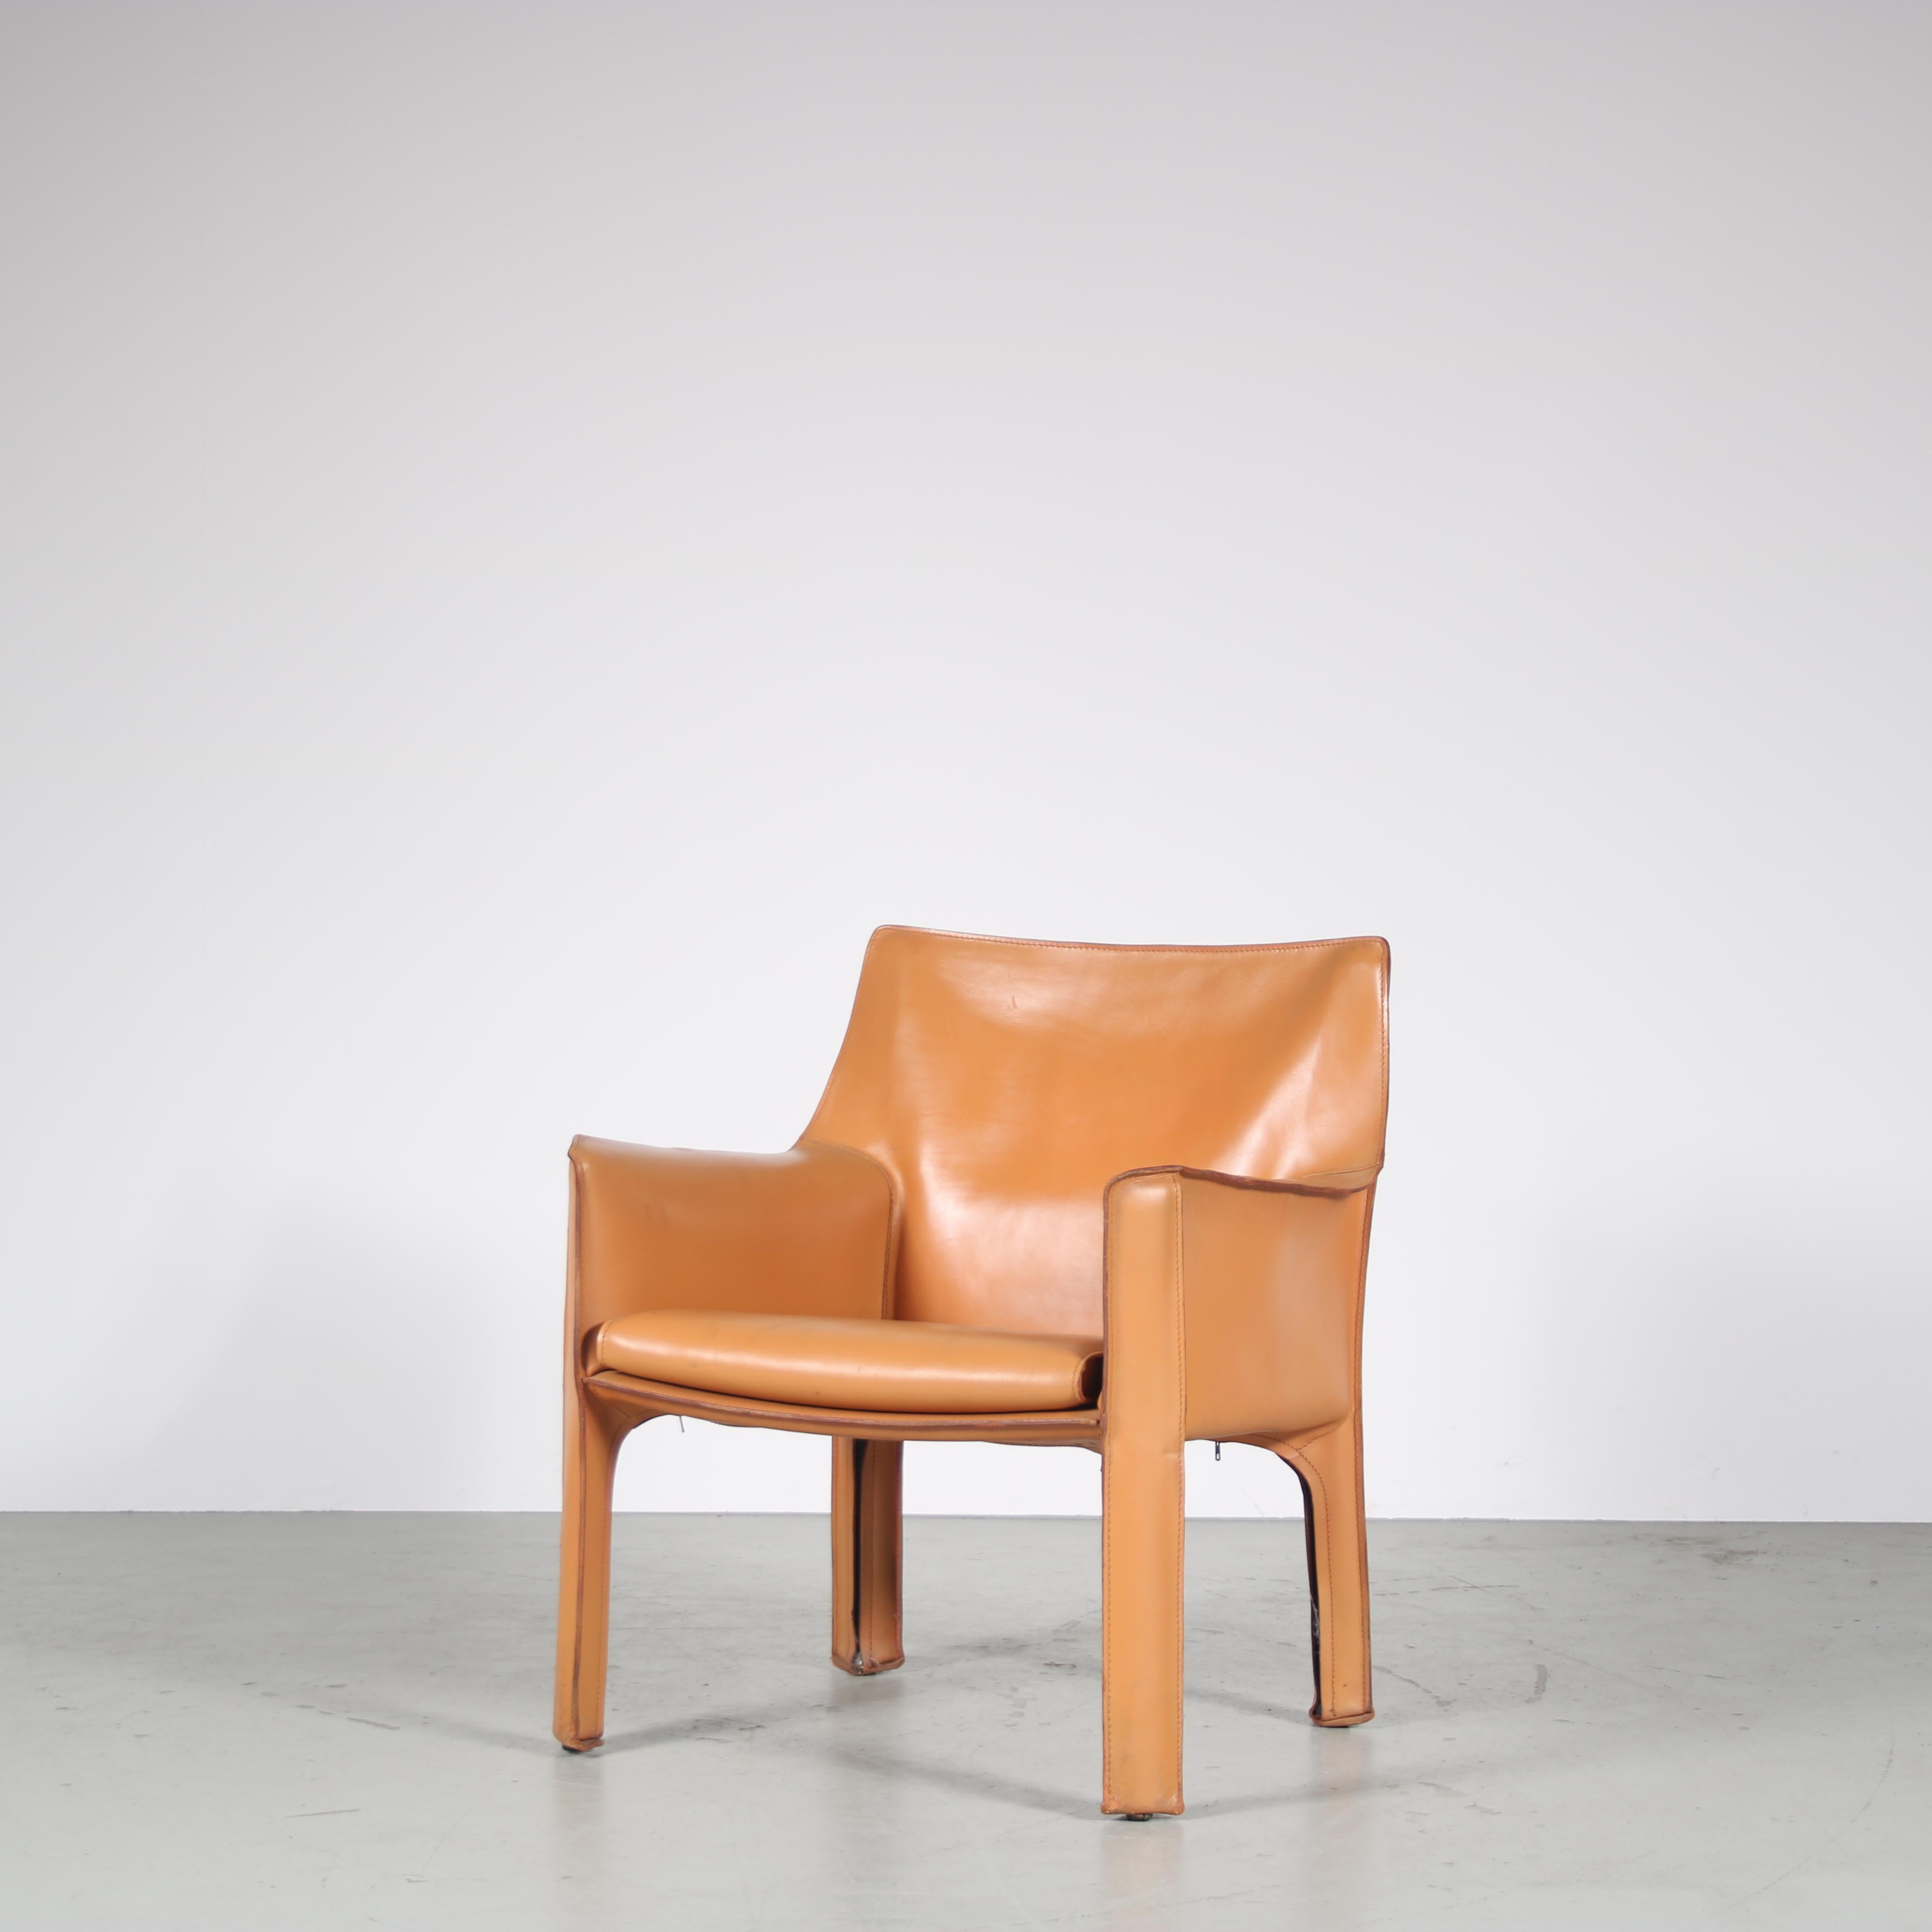 The iconic “Cab” chair / model 414, is a design by Mario Bellini, manufactured by Cassina in Italy around 1980.

This eye-catching chair is fully upholstered in high quality cognac leather, nicely finished with a beautiful stitching. Being